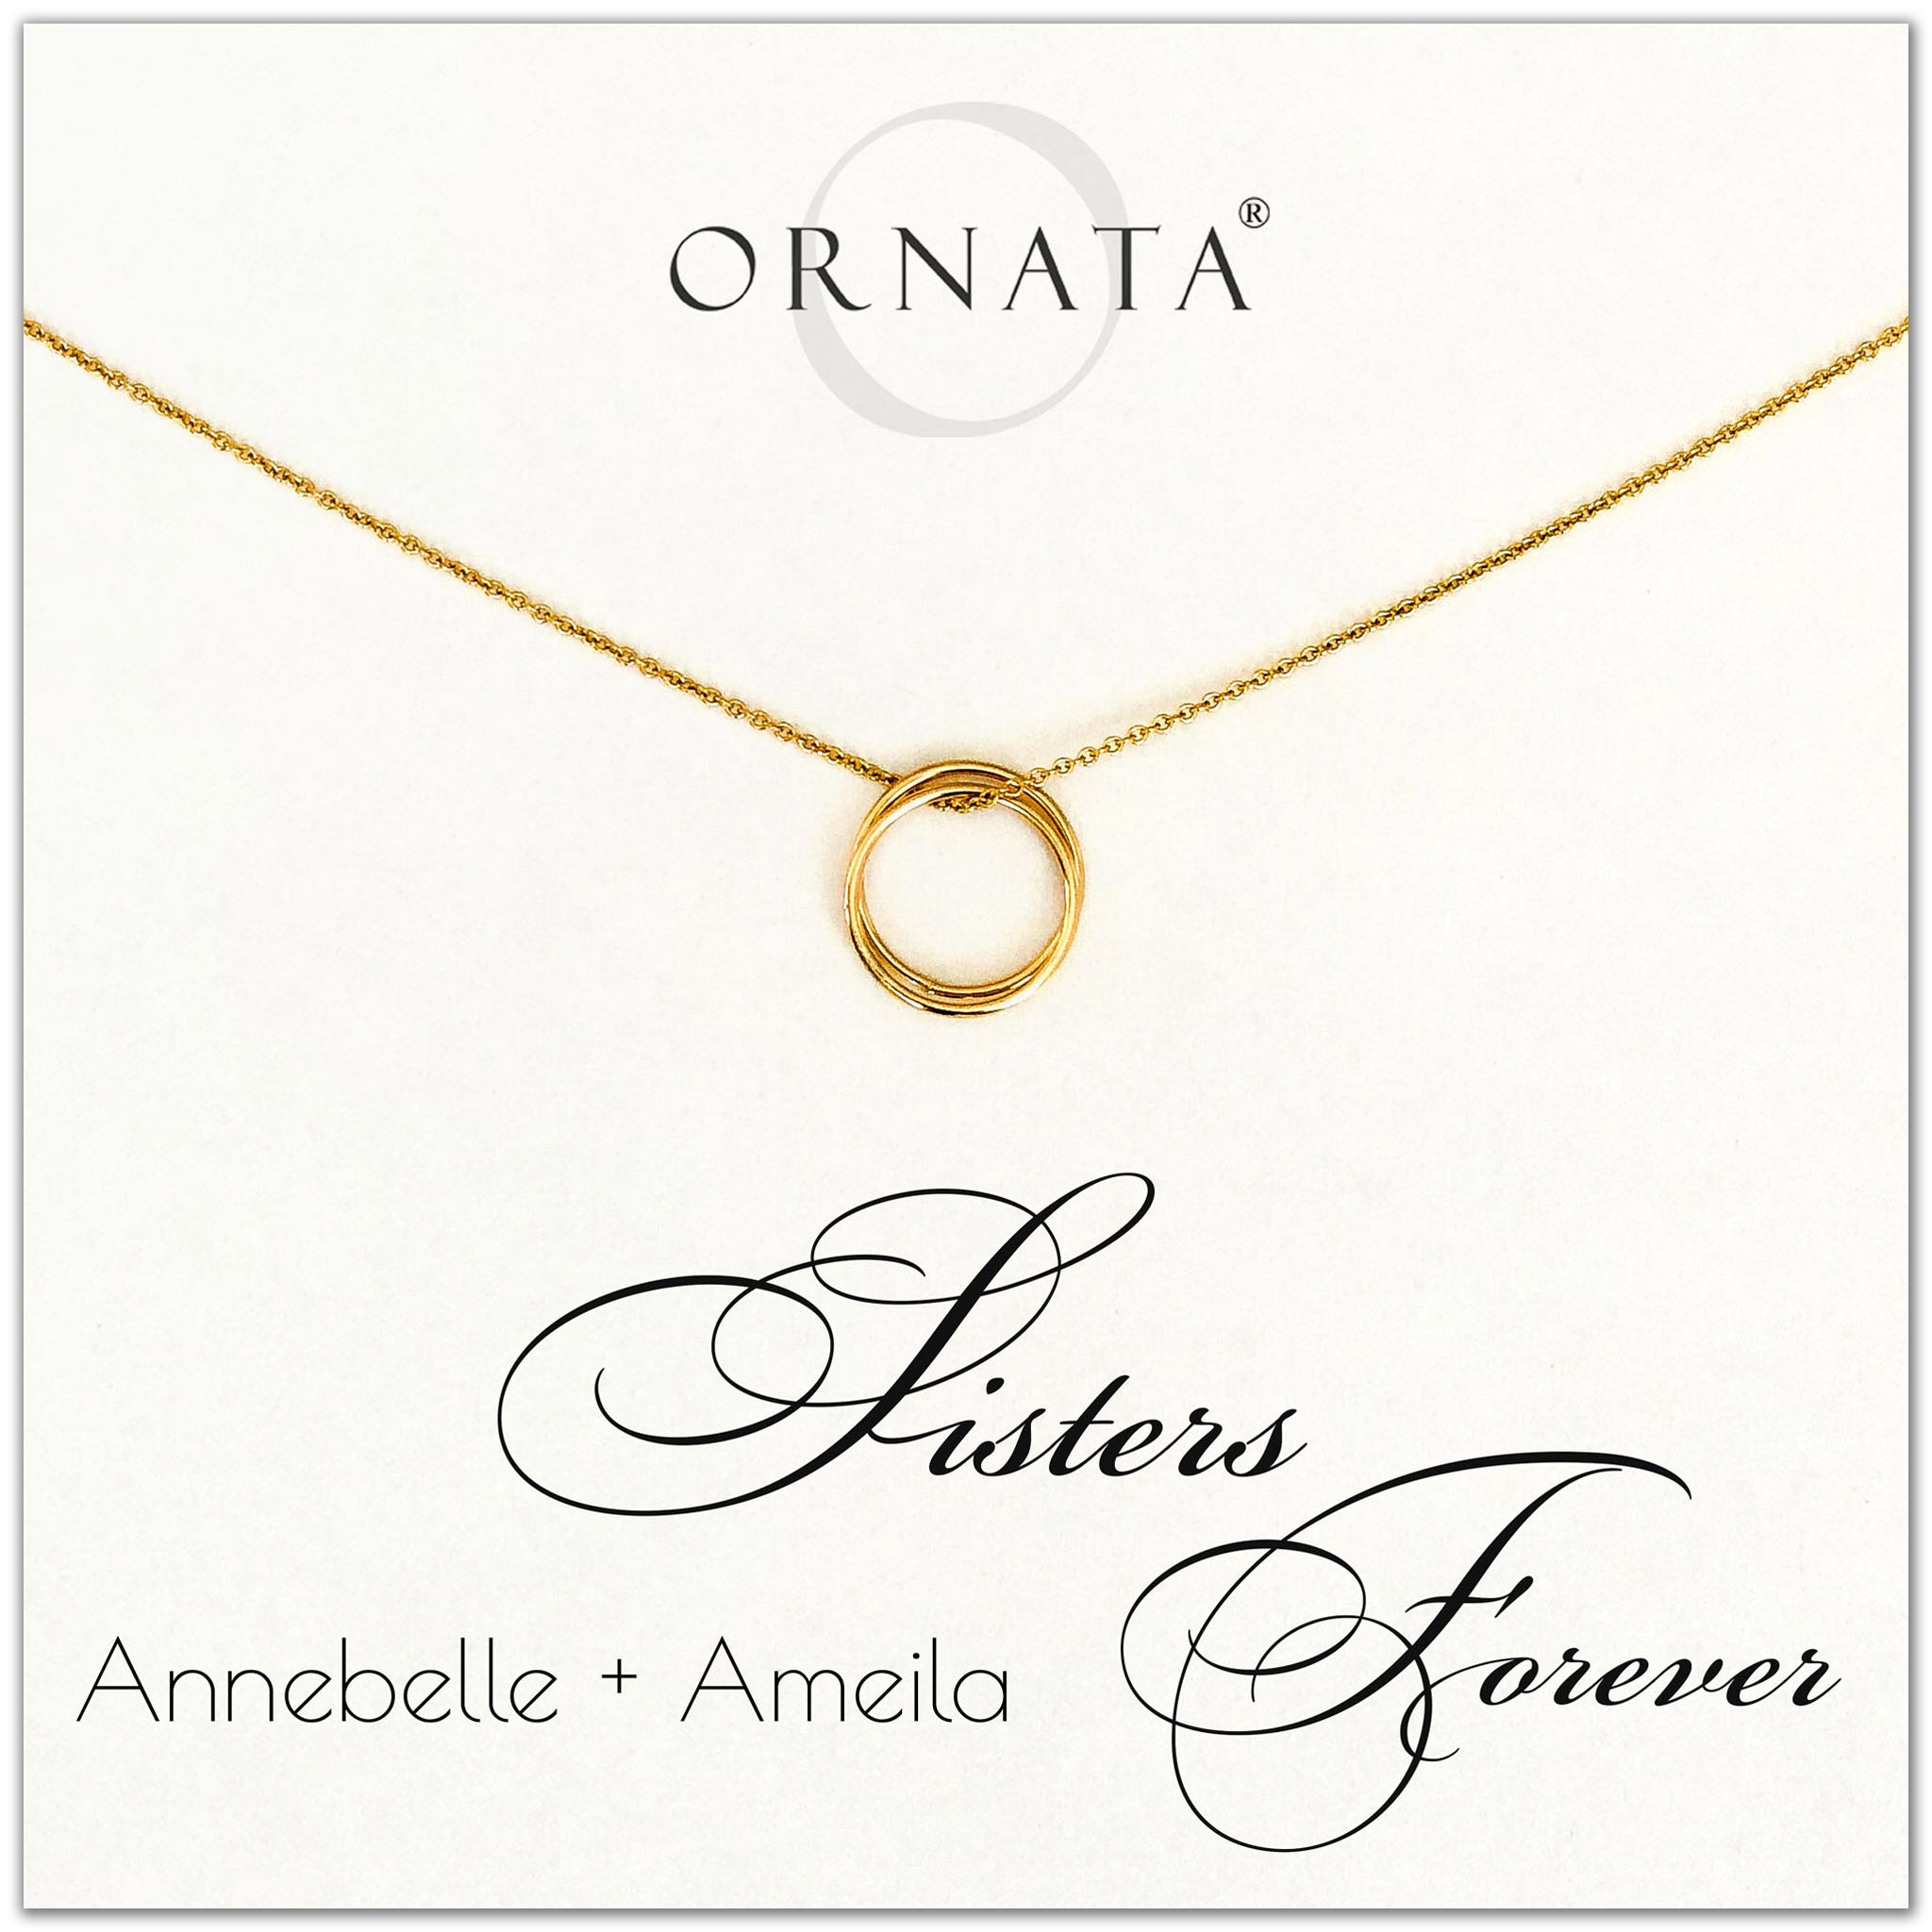 Sisters Forever - personalized gold necklaces. Our 14 karat gold filled custom jewelry is a perfect gift for sisters, best friends, or loved one. 